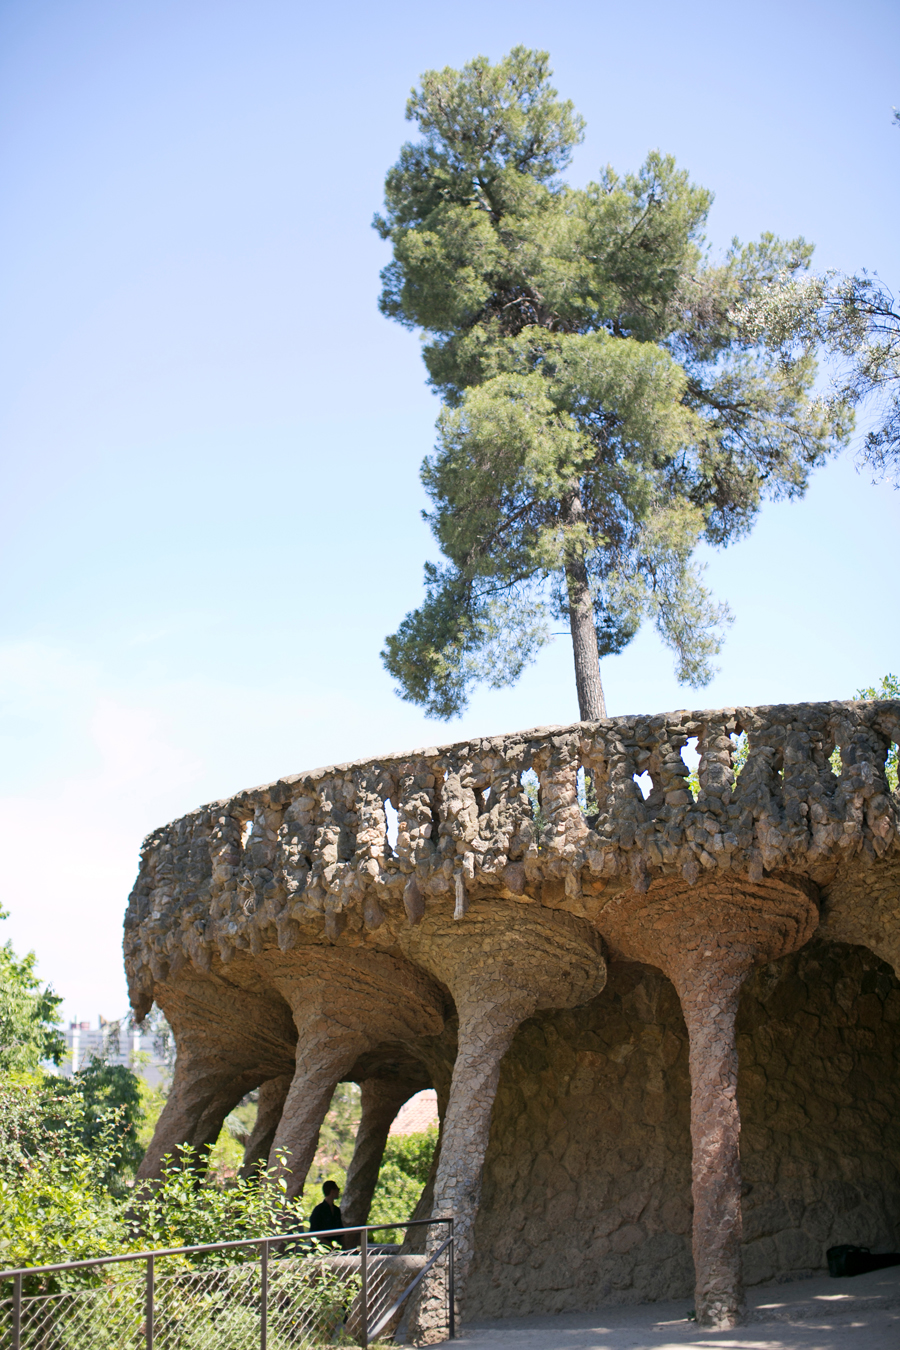 Stone Pillars at Park Guell in Barcelona Spain